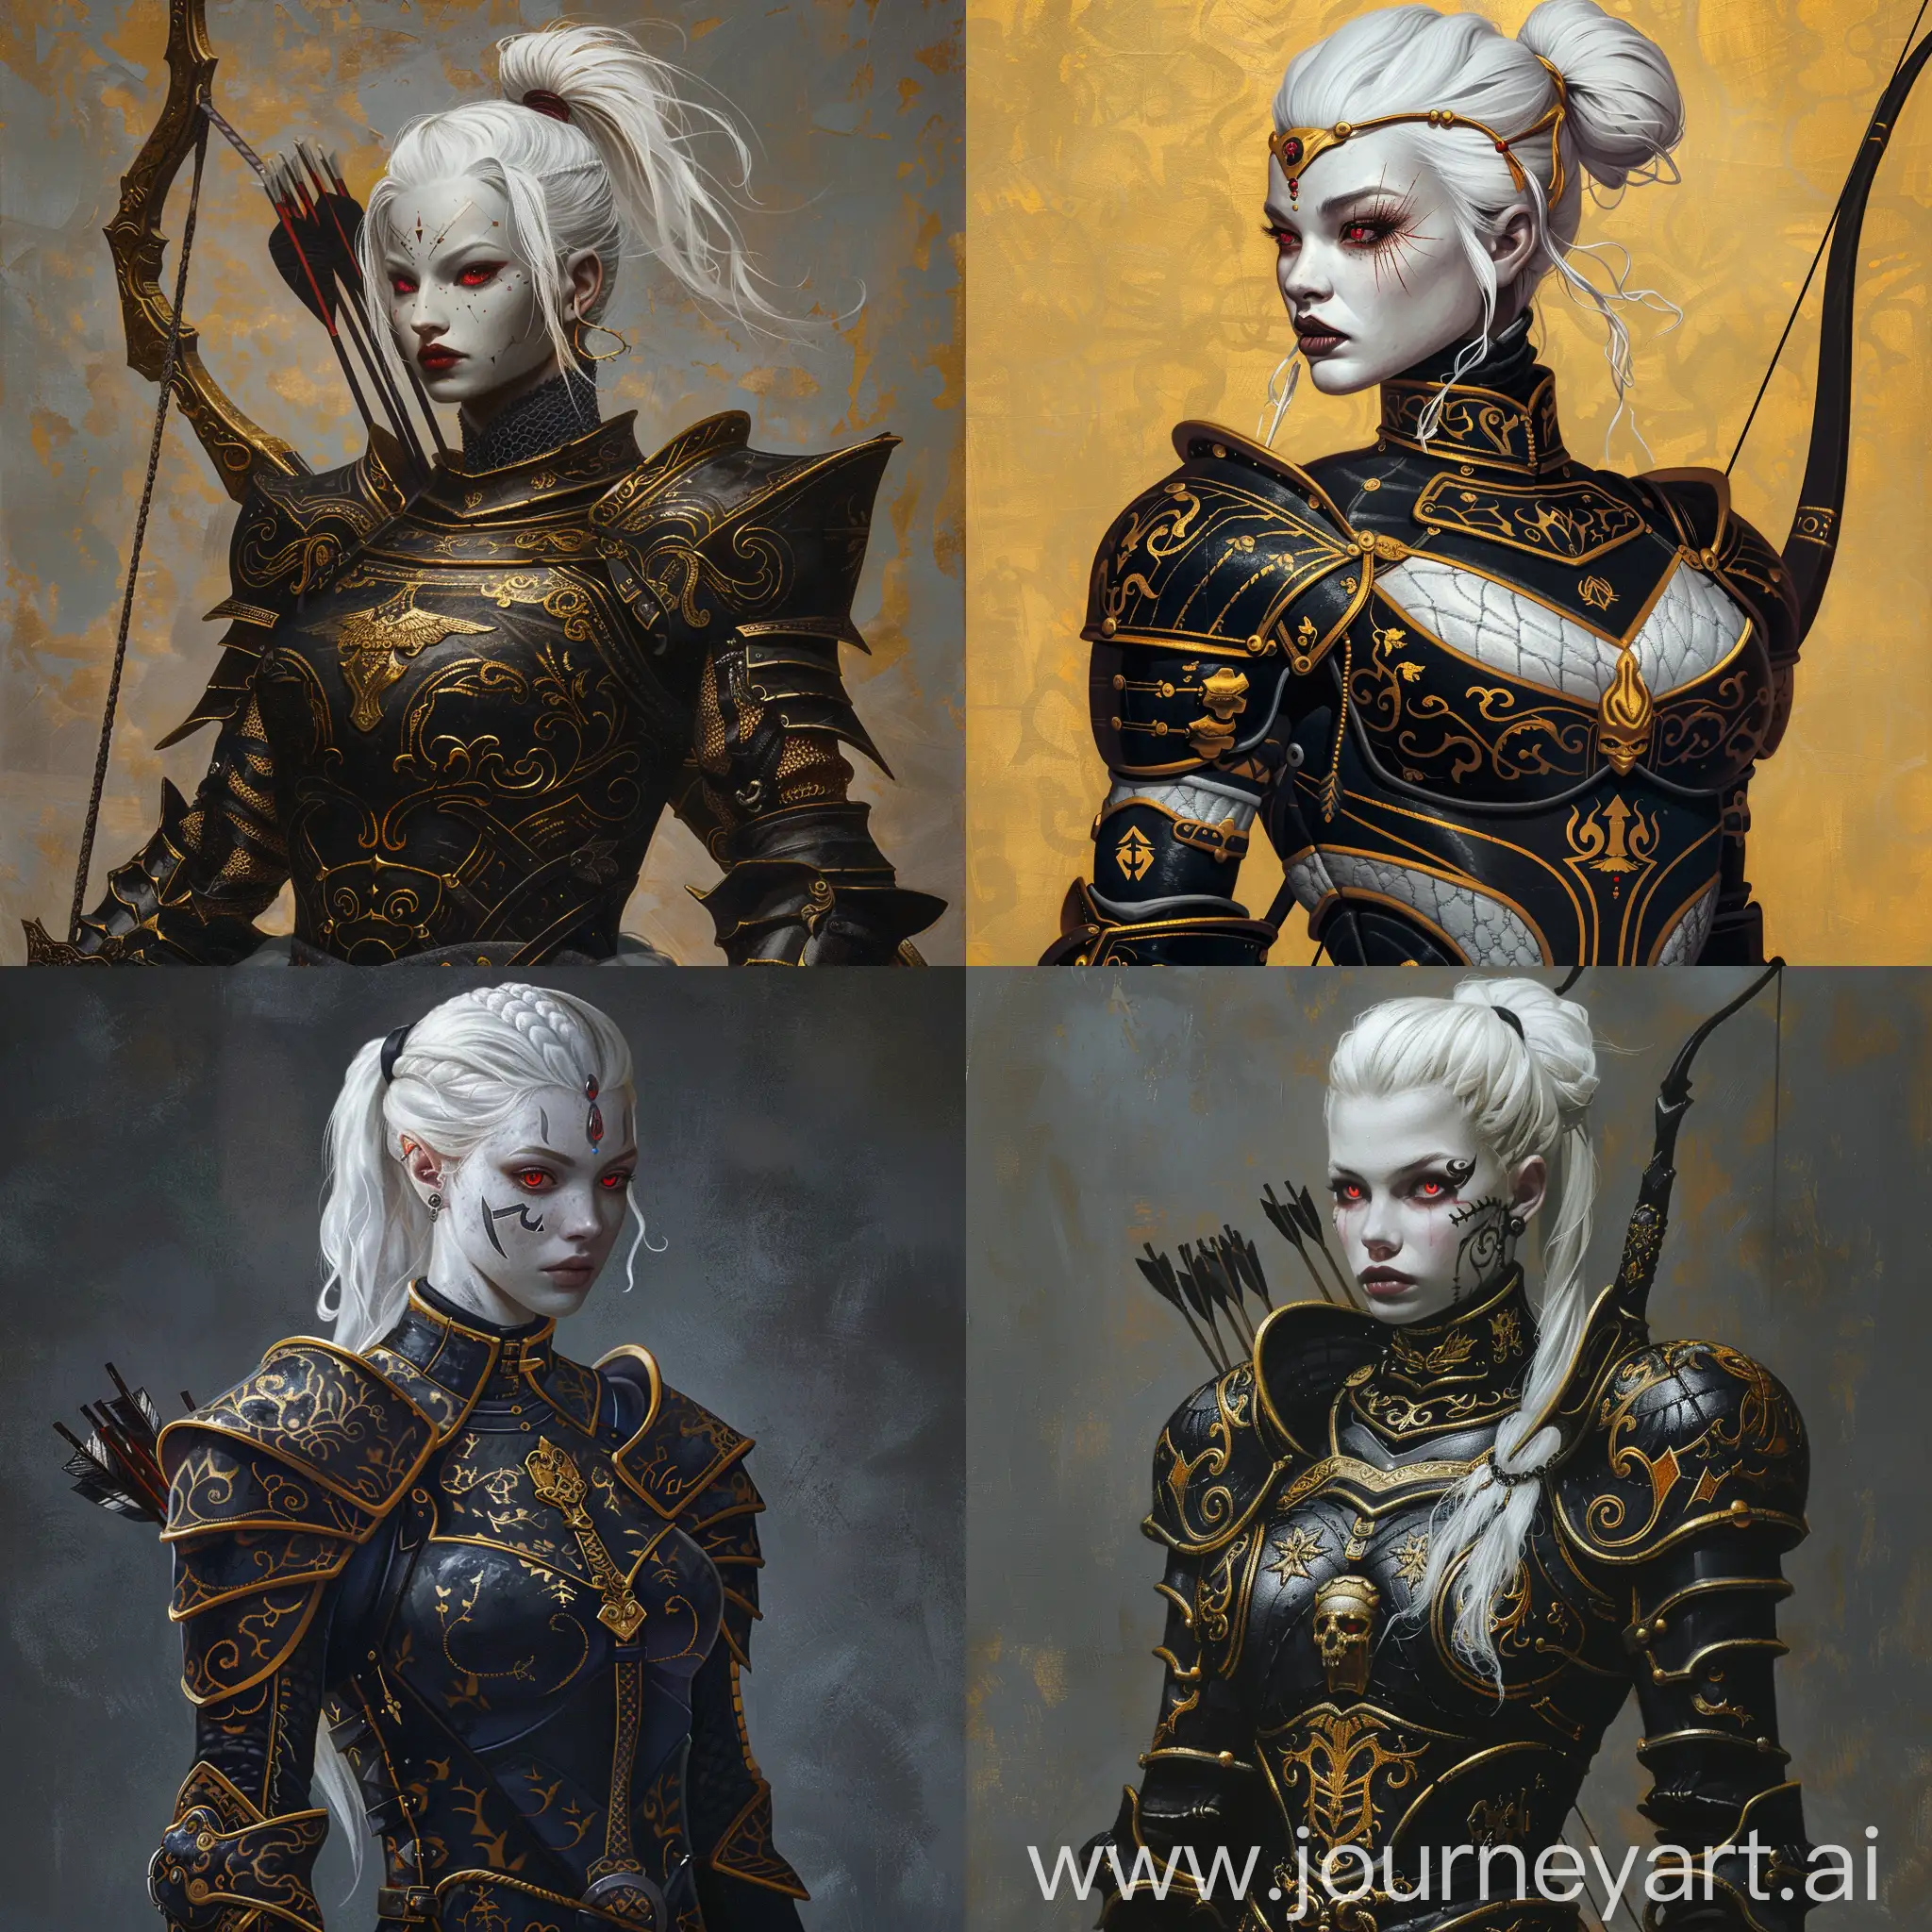 Exquisite-German-Corner-Noble-Female-Archer-in-Black-and-Gold-Armor